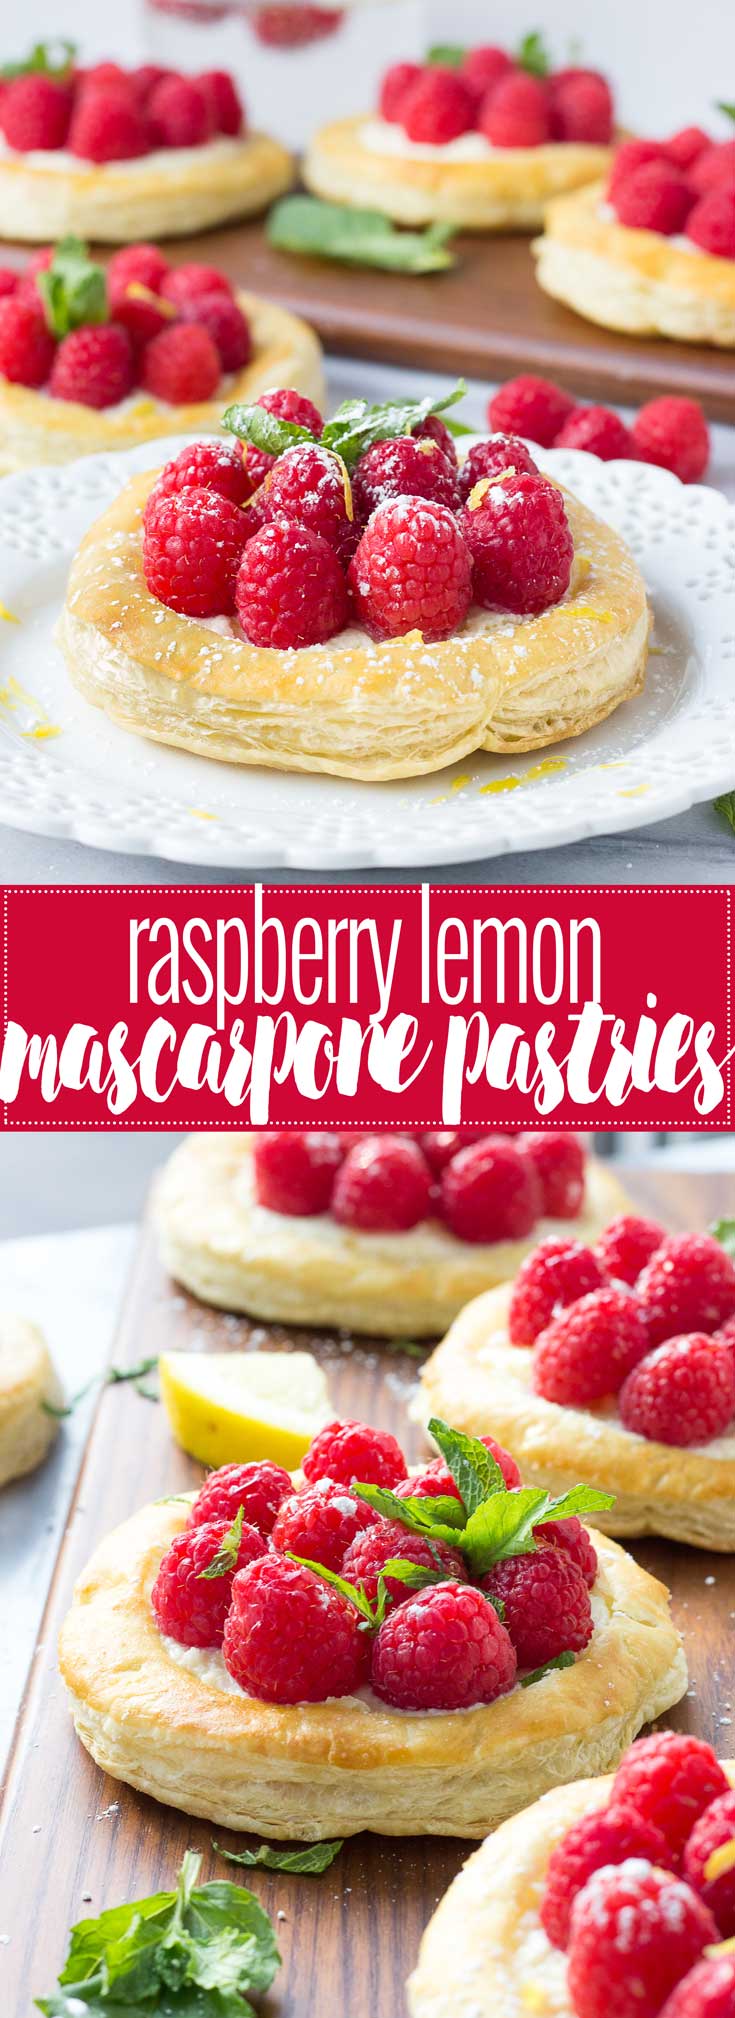 Raspberry Lemon Mascarpone Pastries - Light, flaky Puff Pastry Sheets filled with creamy mascarpone and lemon zest, topped with ripe raspberries and fresh mint - THE recipe for spring brunch!